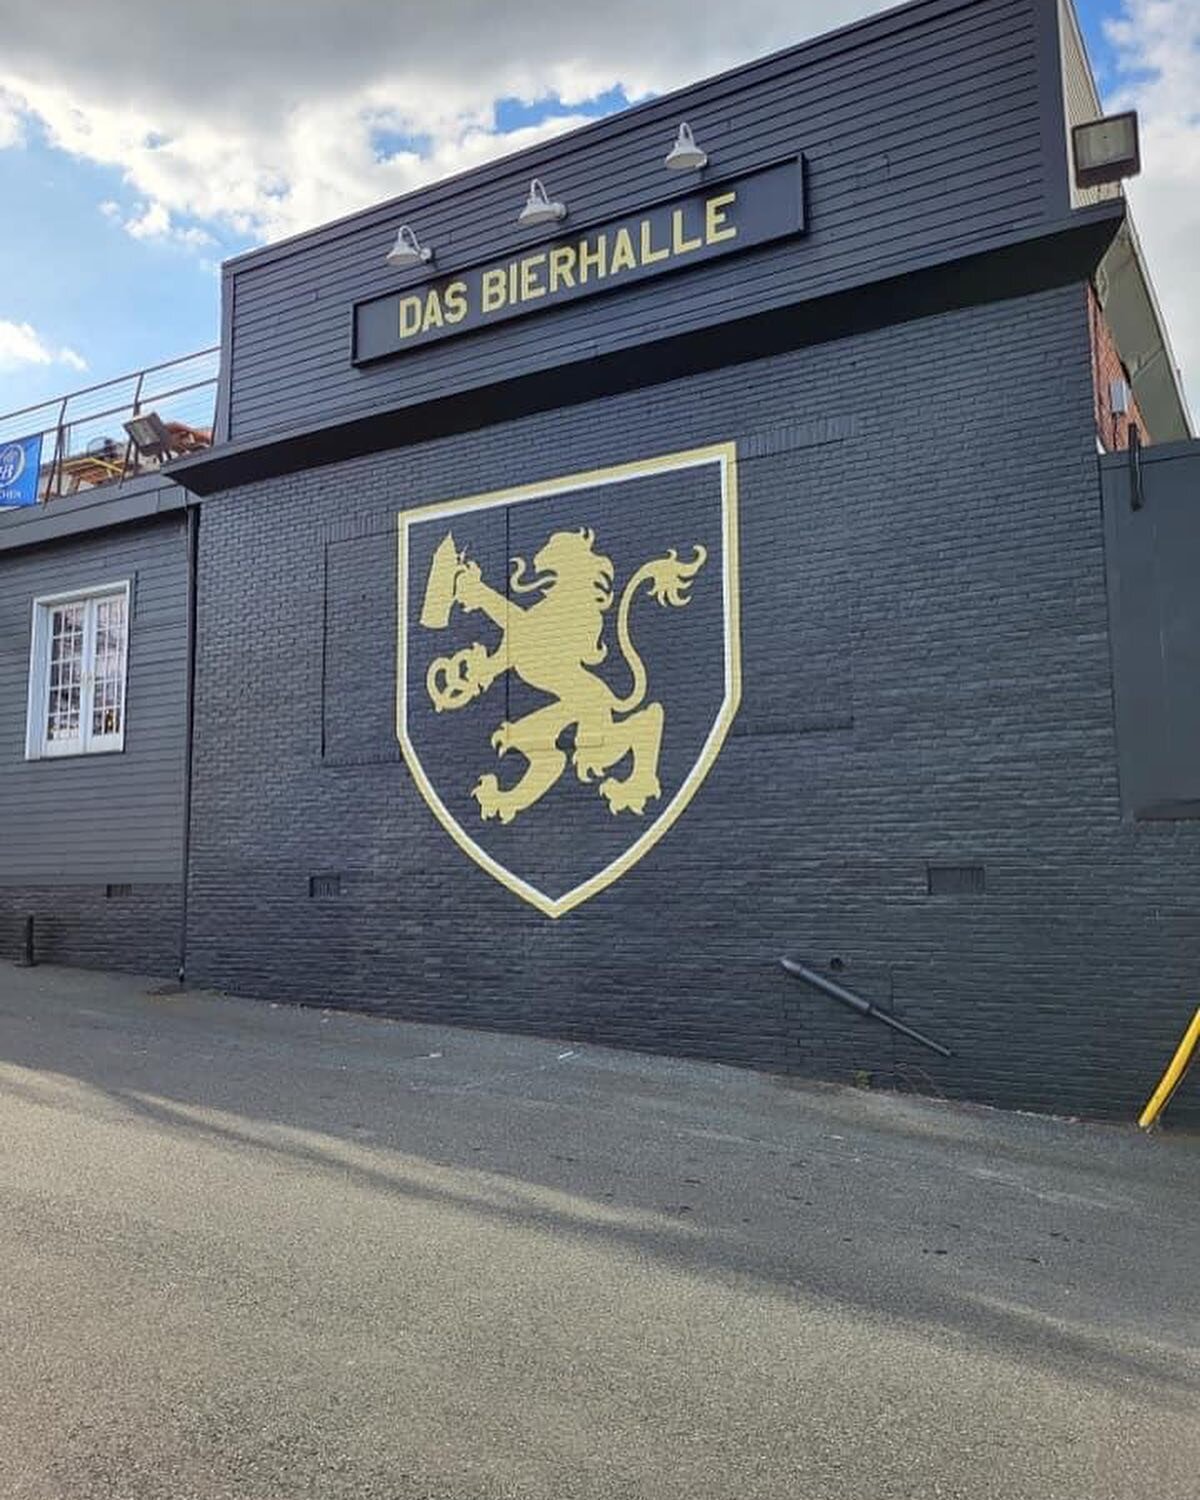 Last week I had the opportunity to bring this design to fruition at the brand new  @dasbierhallebelair on Main Street. Painted, built, and installed the 16&rsquo; sign along with the mural of the logo.